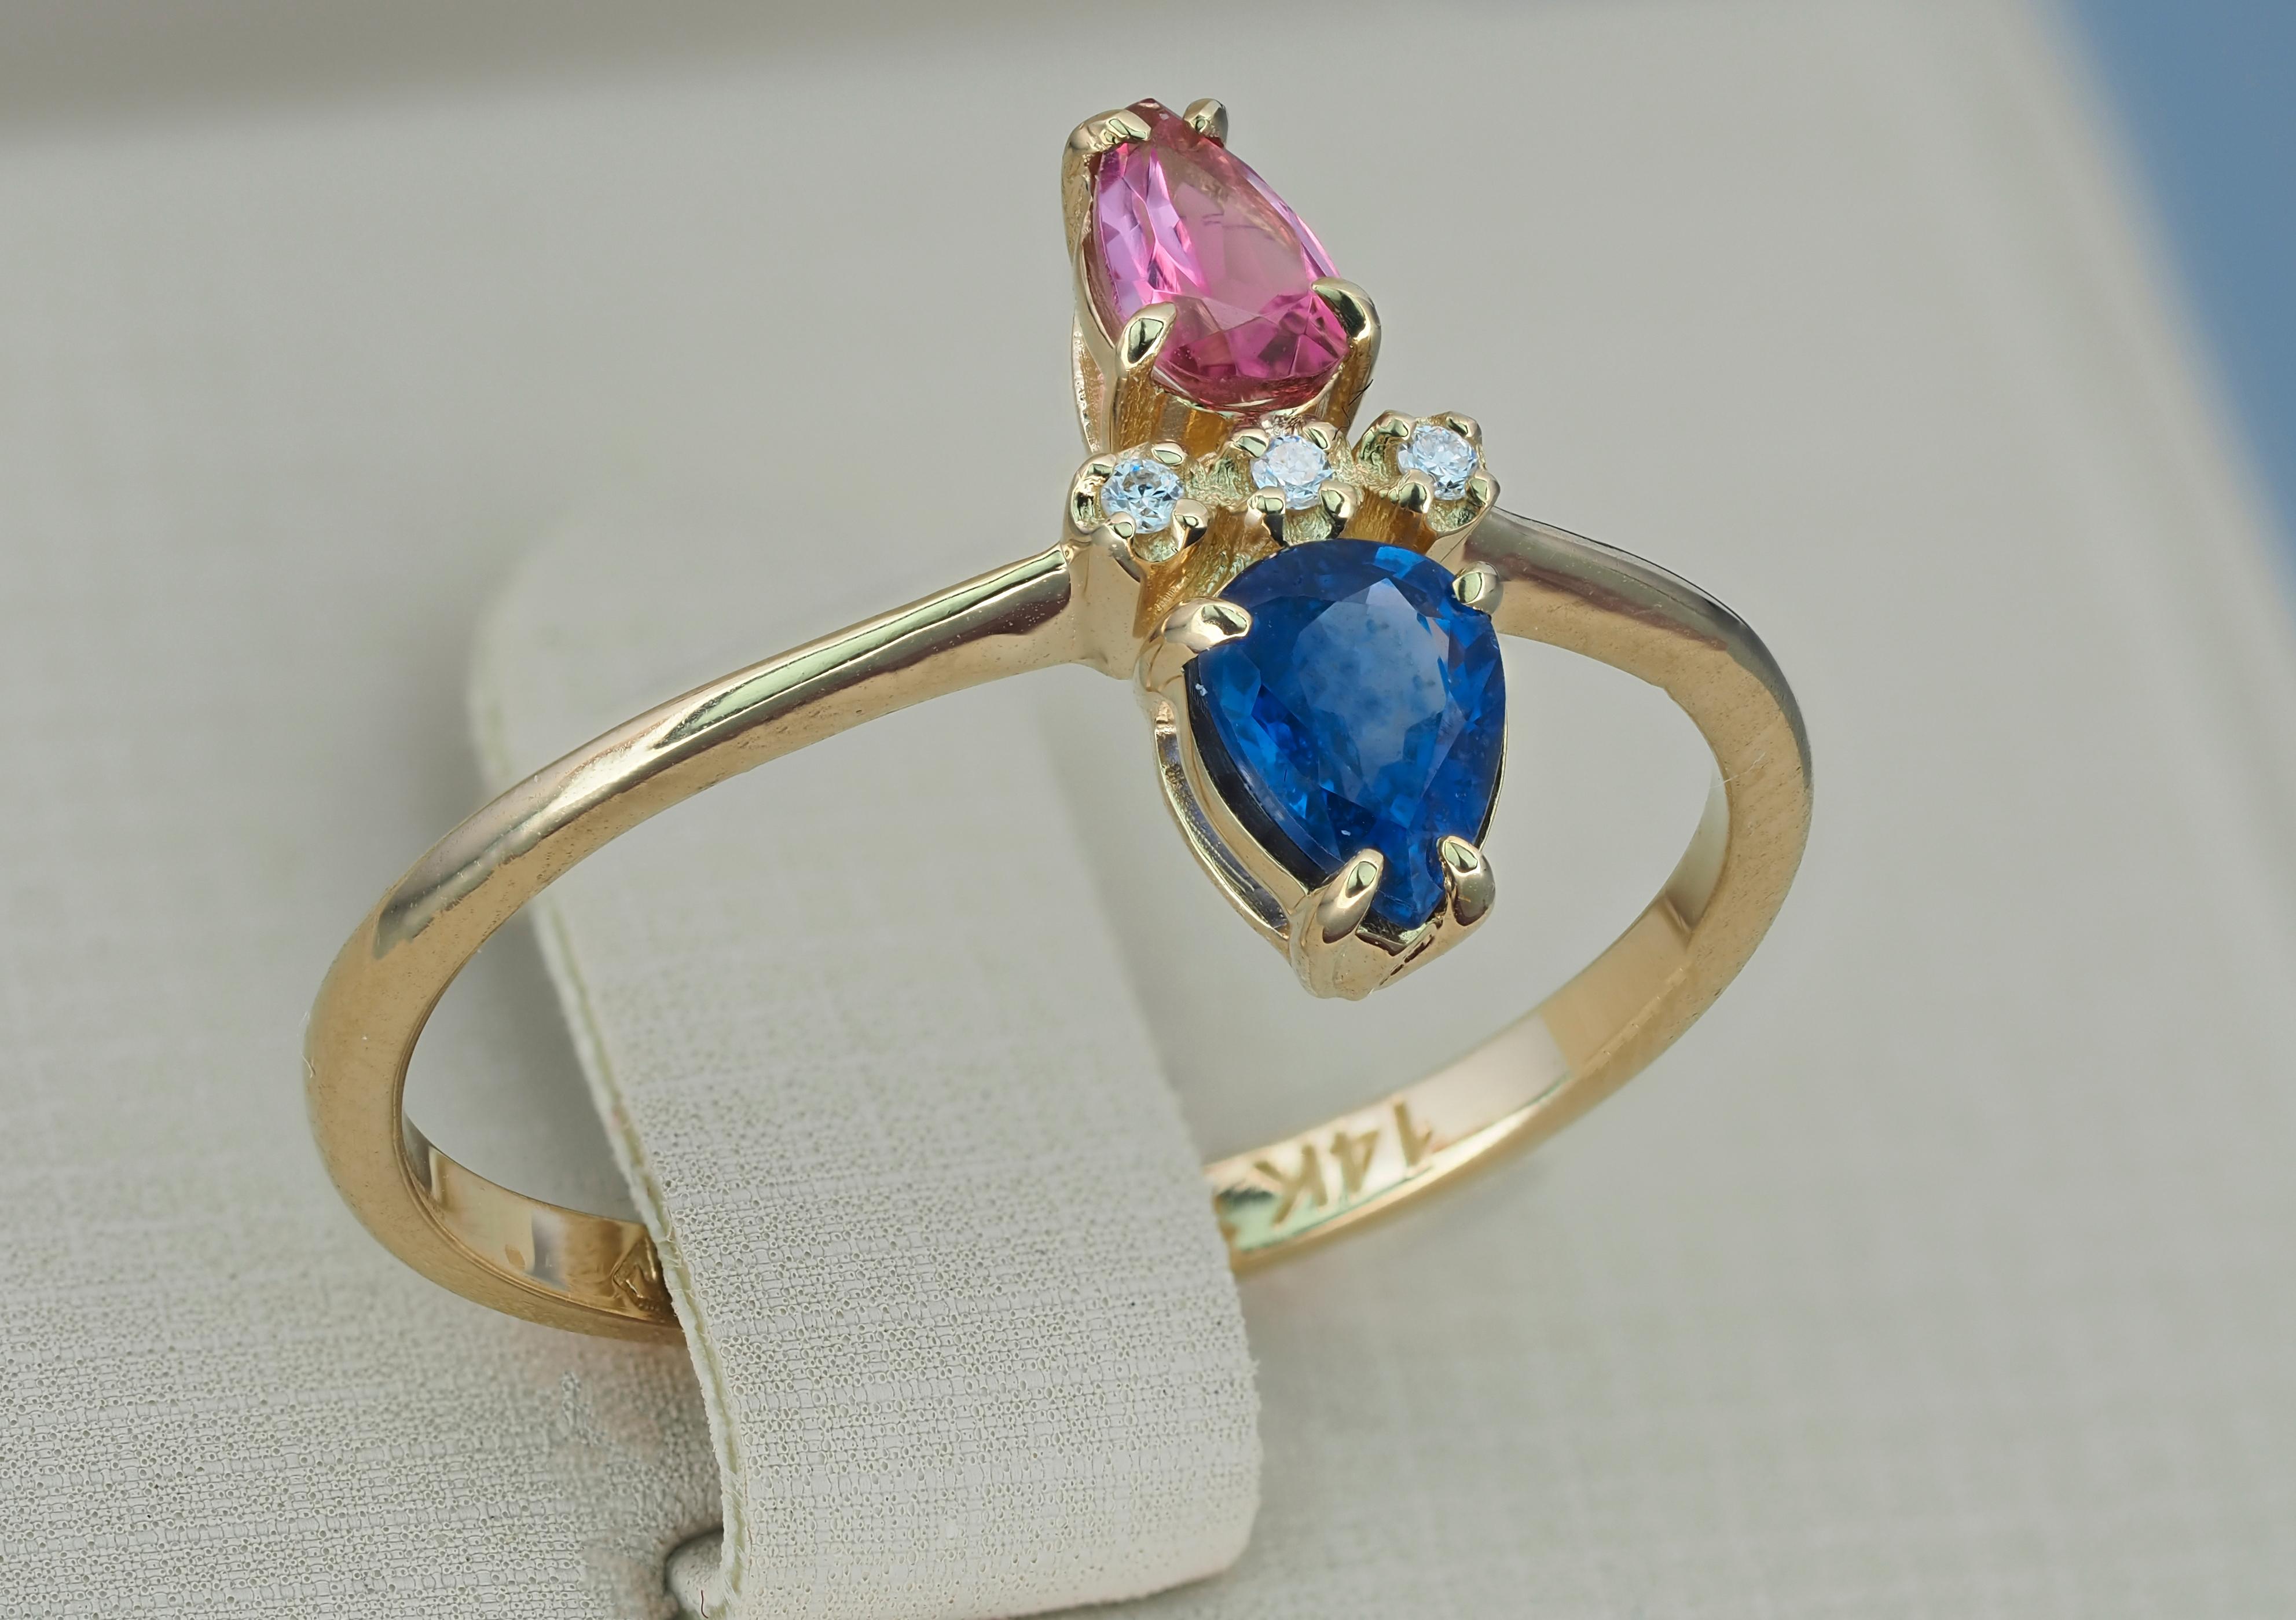 For Sale:  14k Gold Ring in Art Deco Style with Central Sapphire, Tourmaline and Diamonds 6